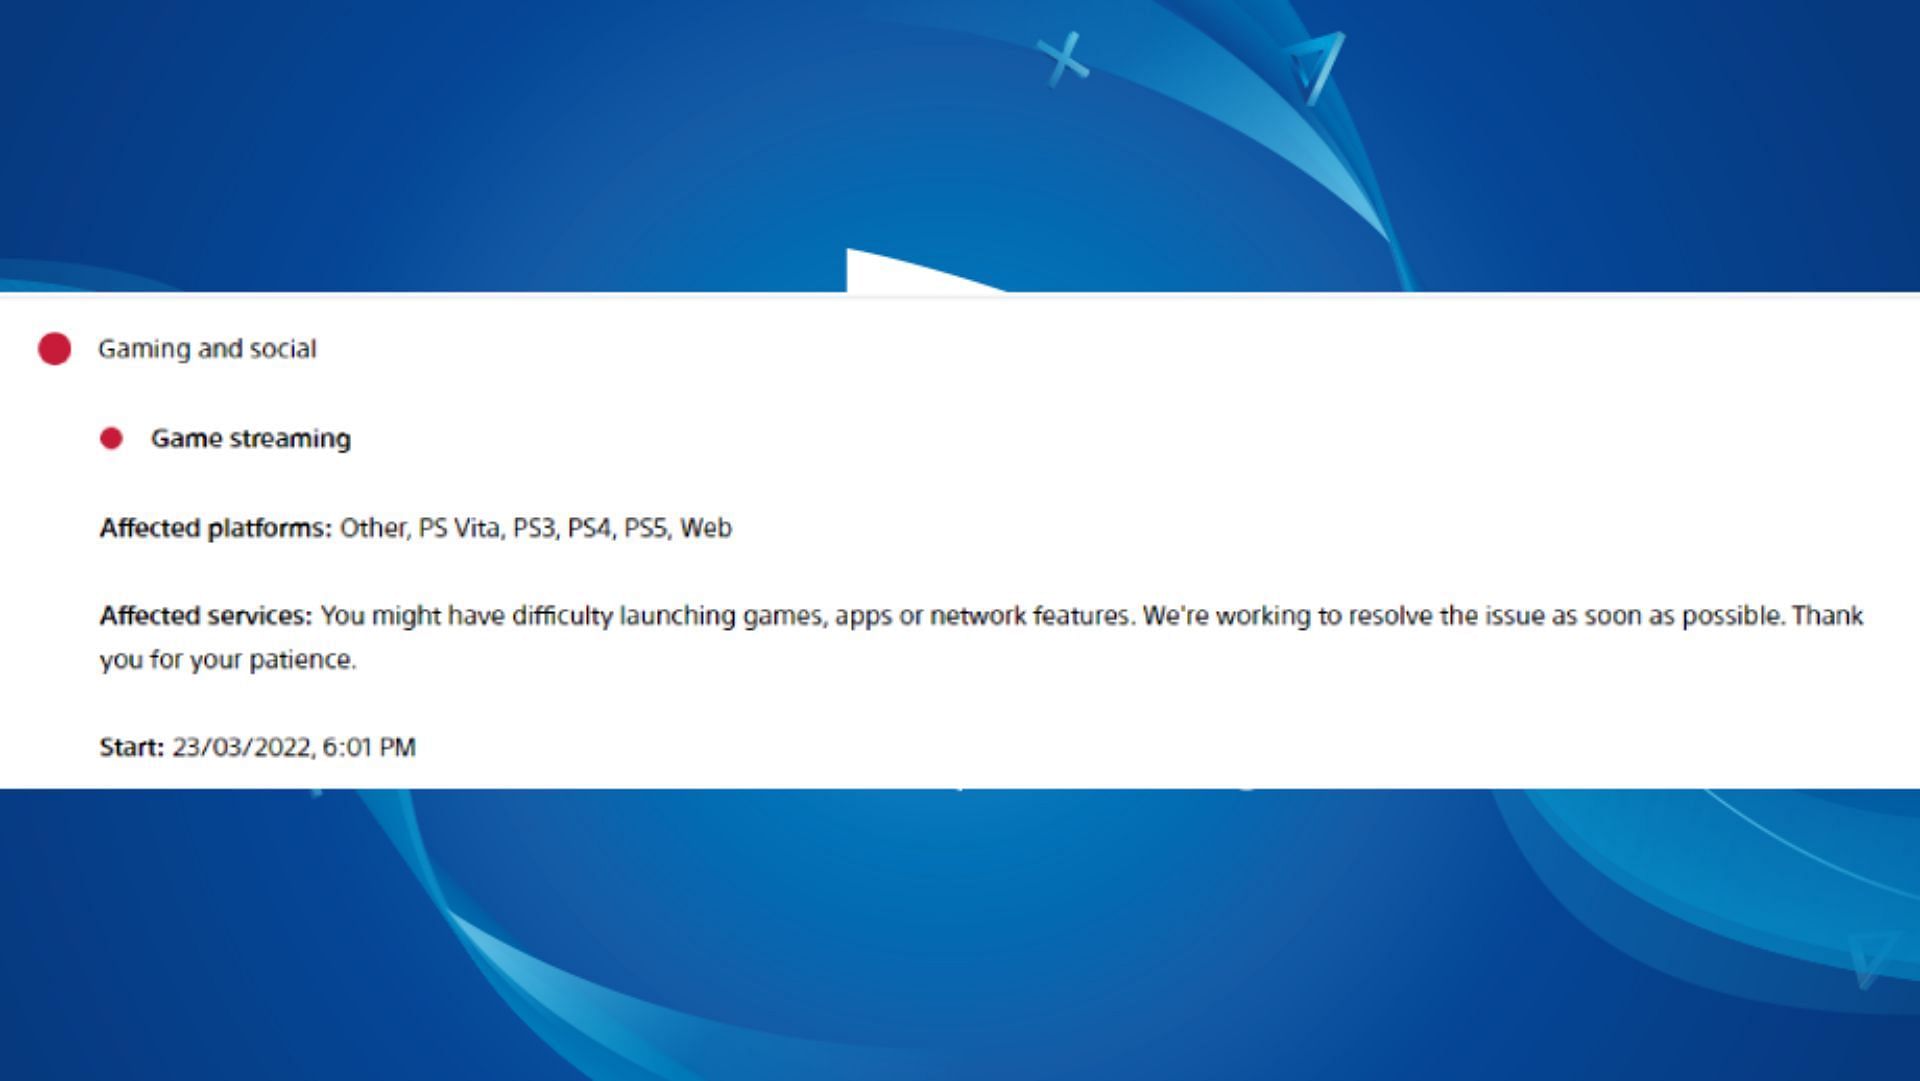 Is PSN down on 23? Users report issues with PlayStation Network on PS4 and PS5